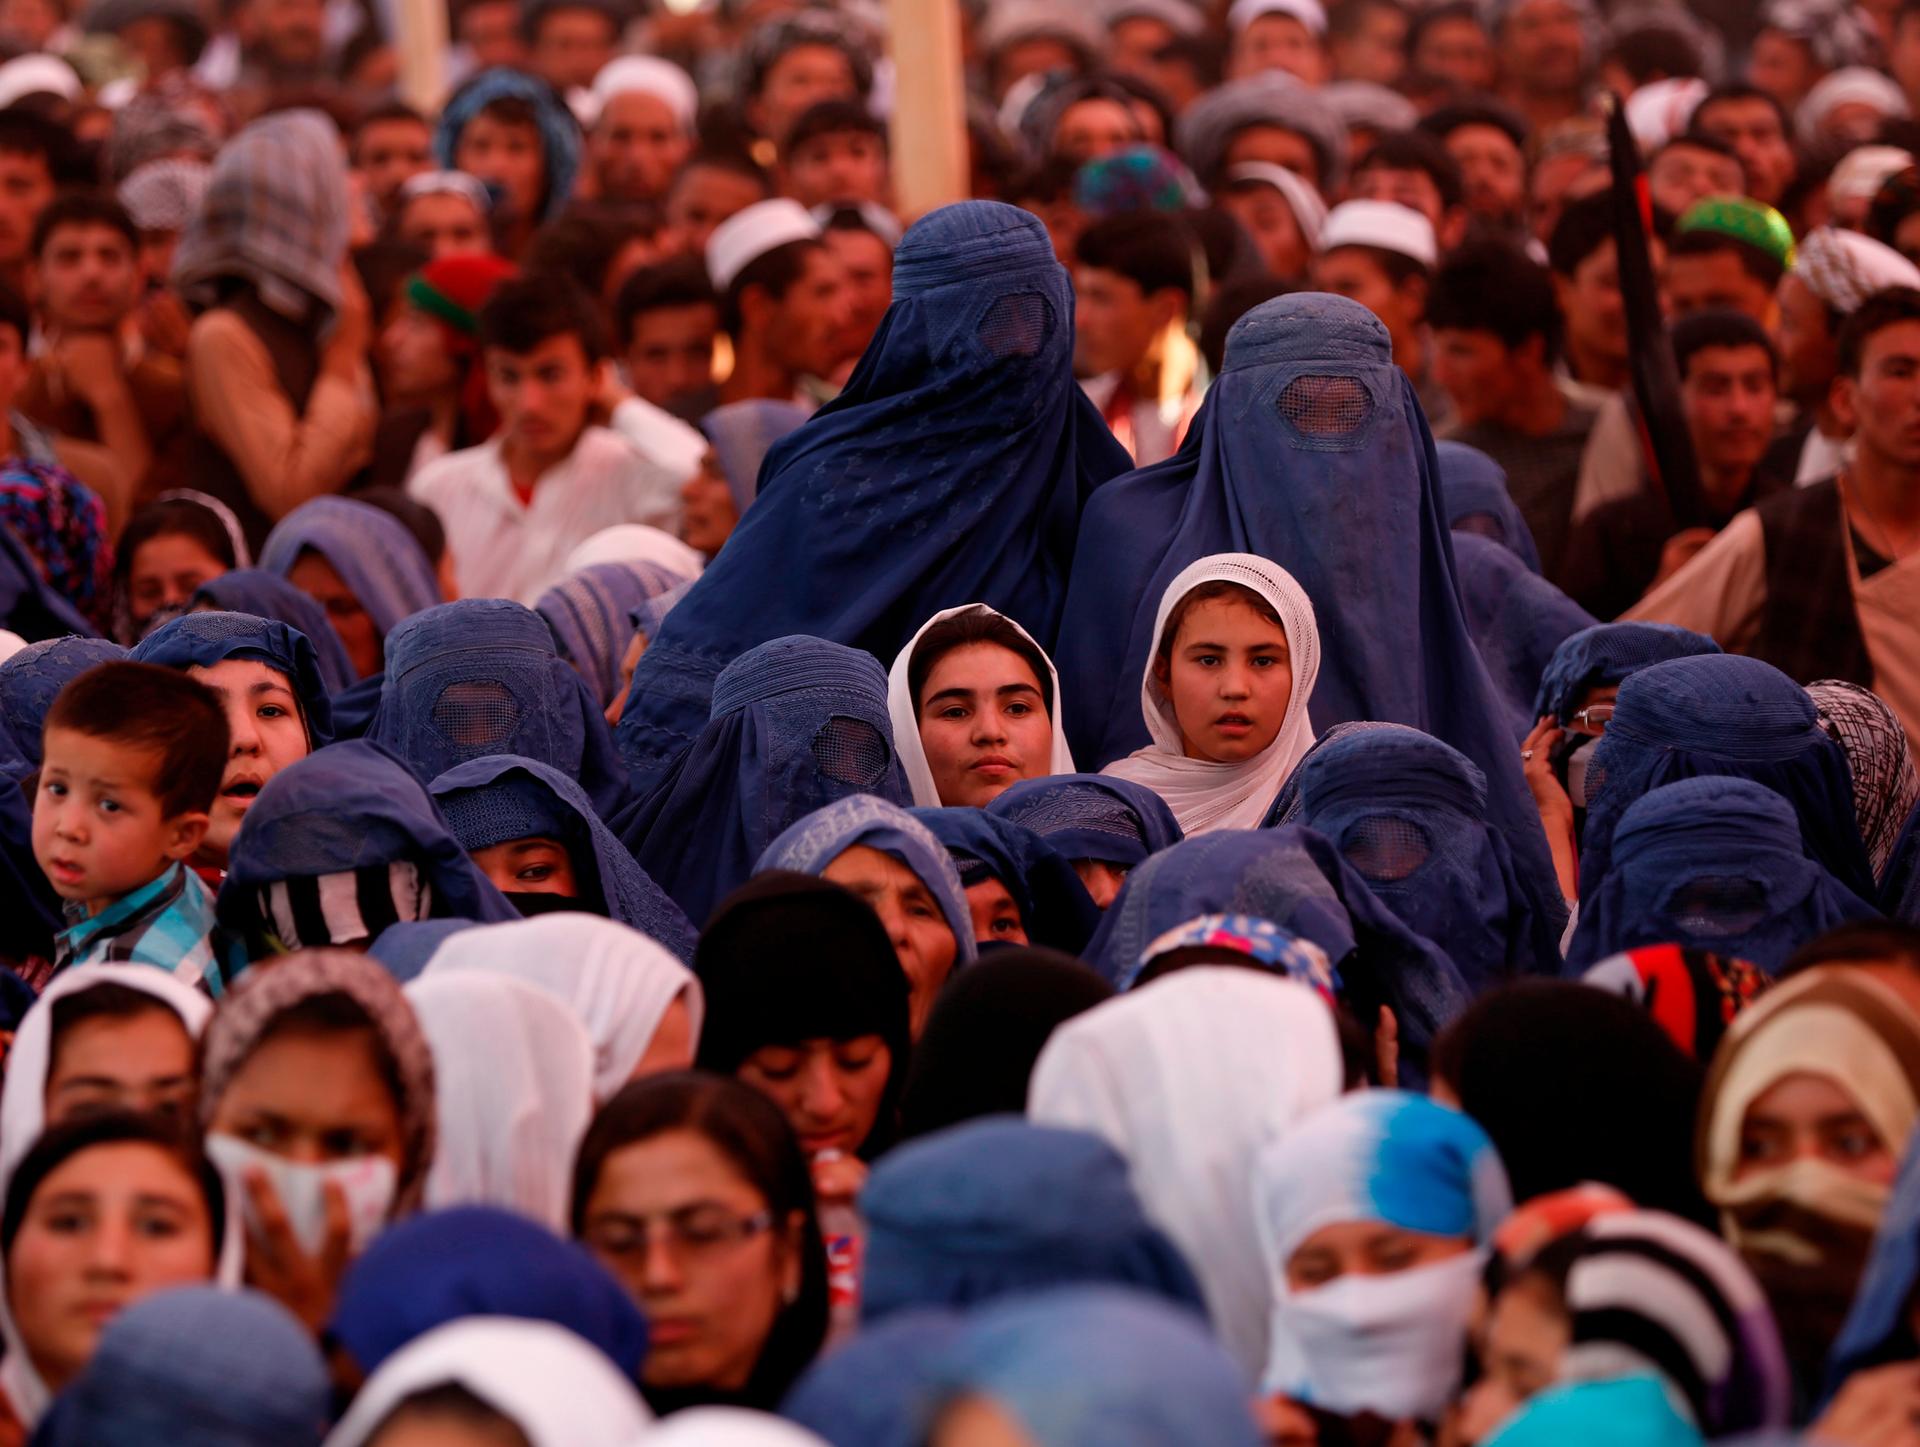 Women attend an election campaign by Afghan presidential candidate Ashraf Ghani Ahmadzai in Jozjan province on June 2, 2014. The second round of Afghanistan's presidential election will take place on June 14.  